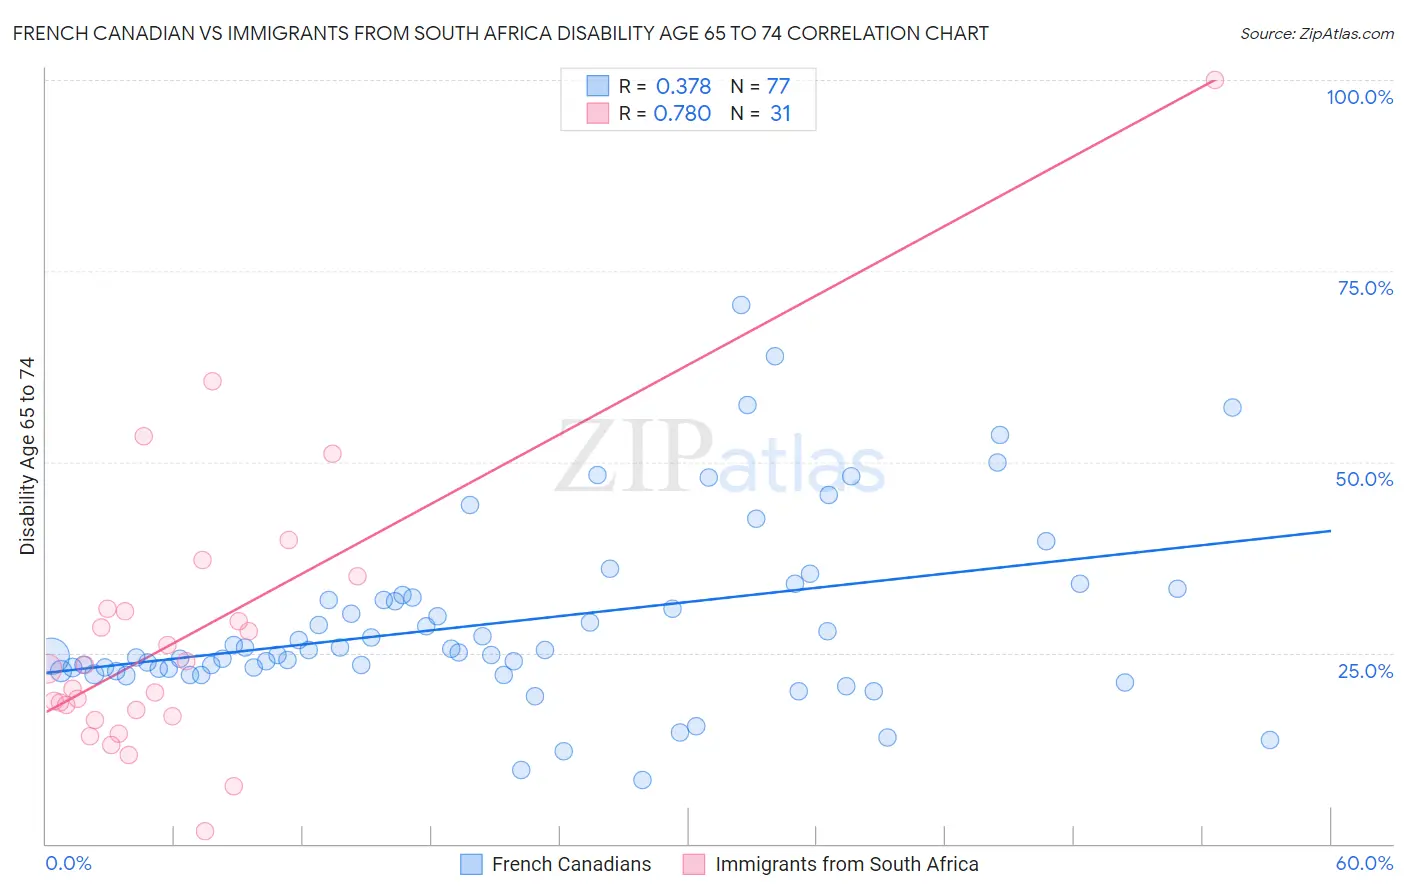 French Canadian vs Immigrants from South Africa Disability Age 65 to 74